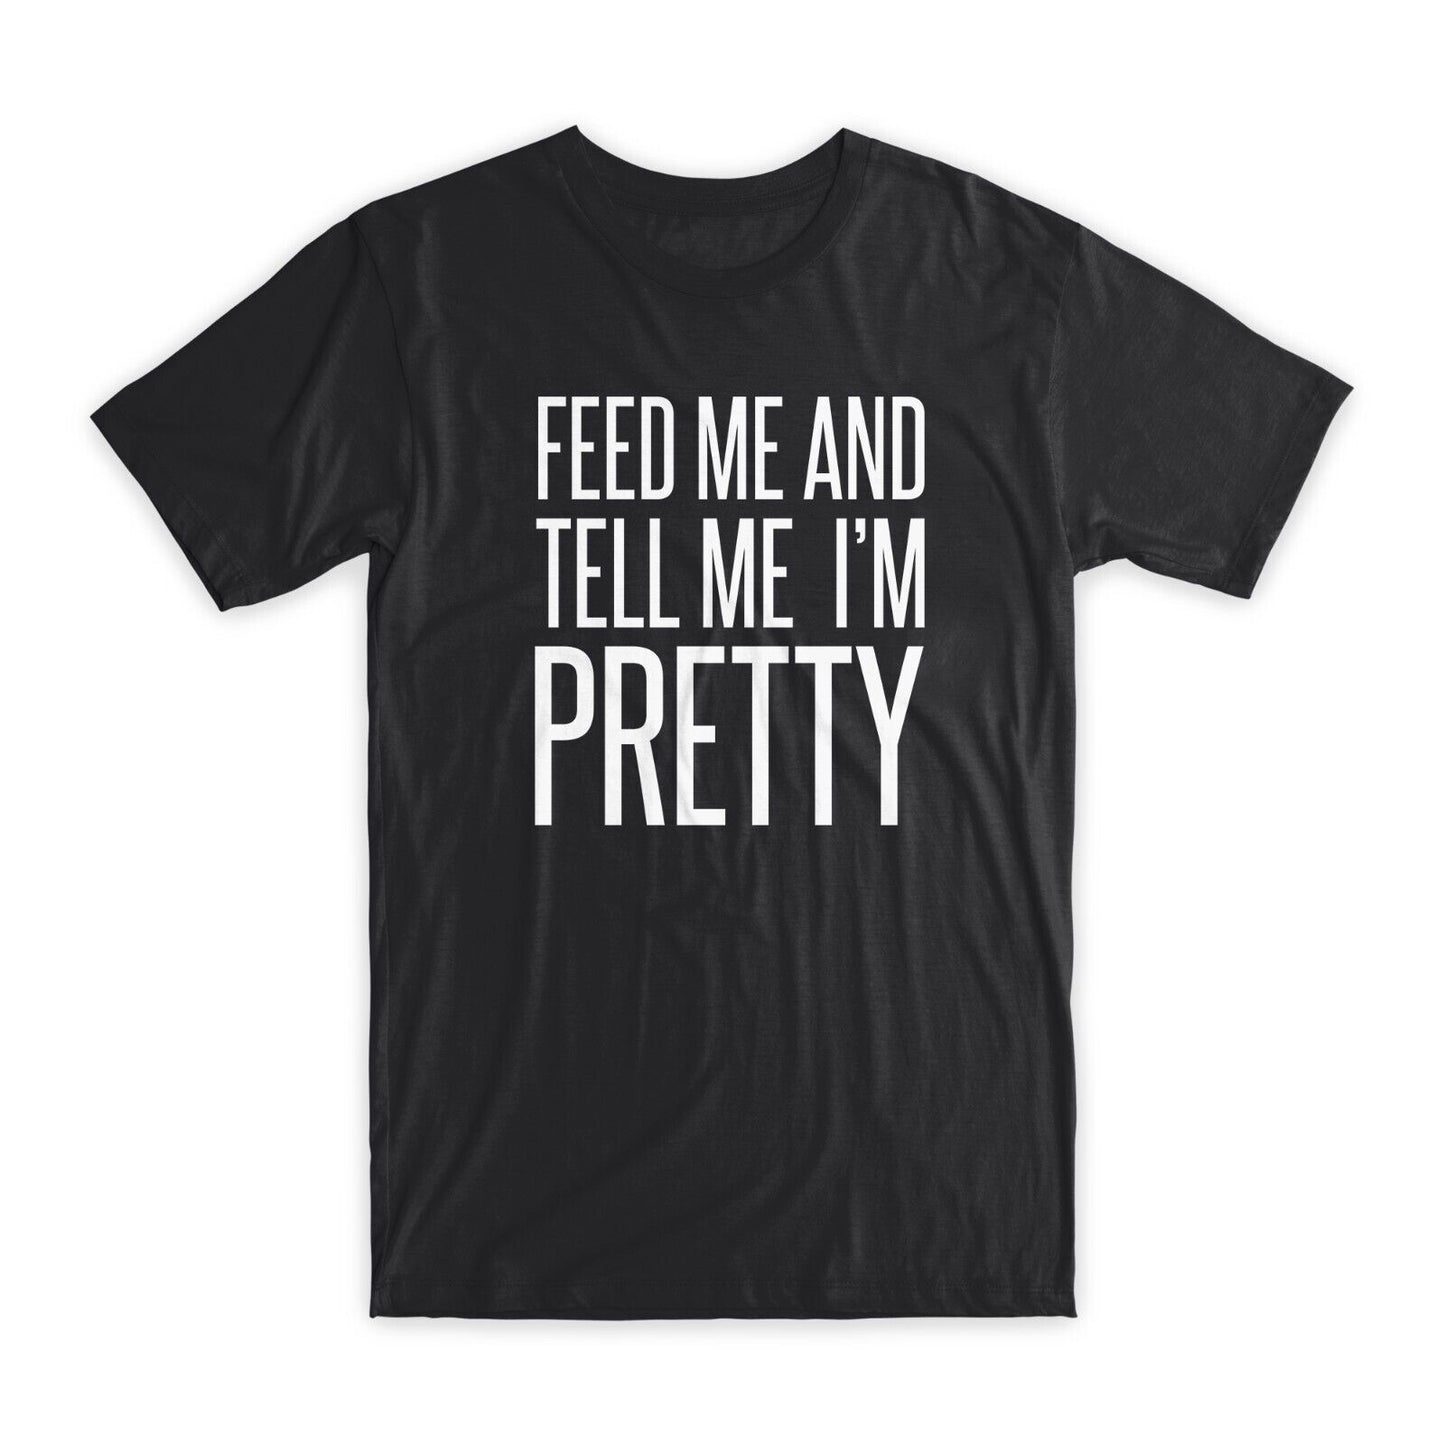 Feed Me and Tell Me I'm Pretty T-Shirt Premium Soft Cotton Funny Tees Gifts NEW